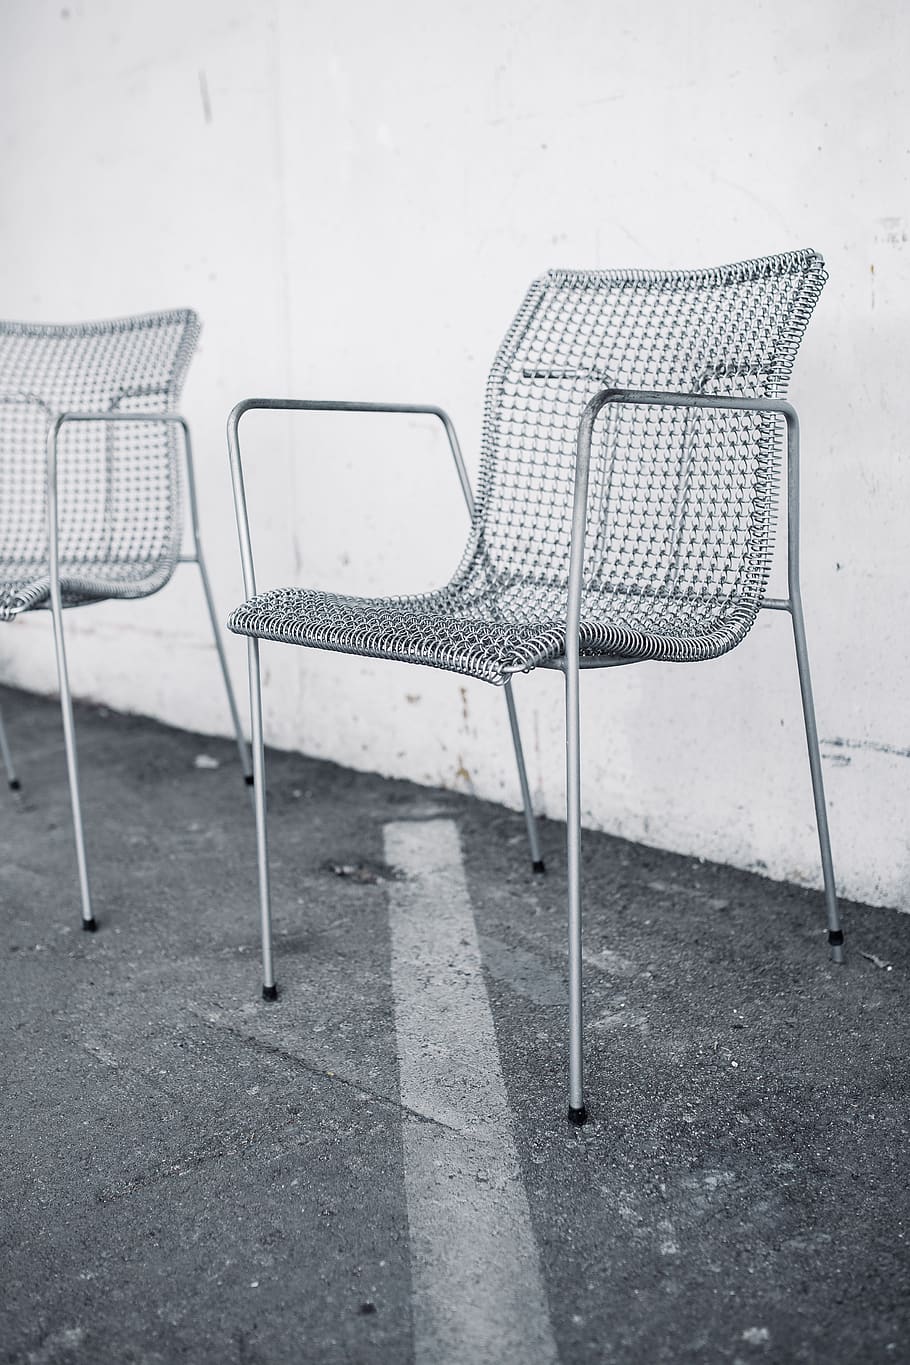 vintage, minimal, clean, old, Retro, Metal, Dining, Chair, seat, absence